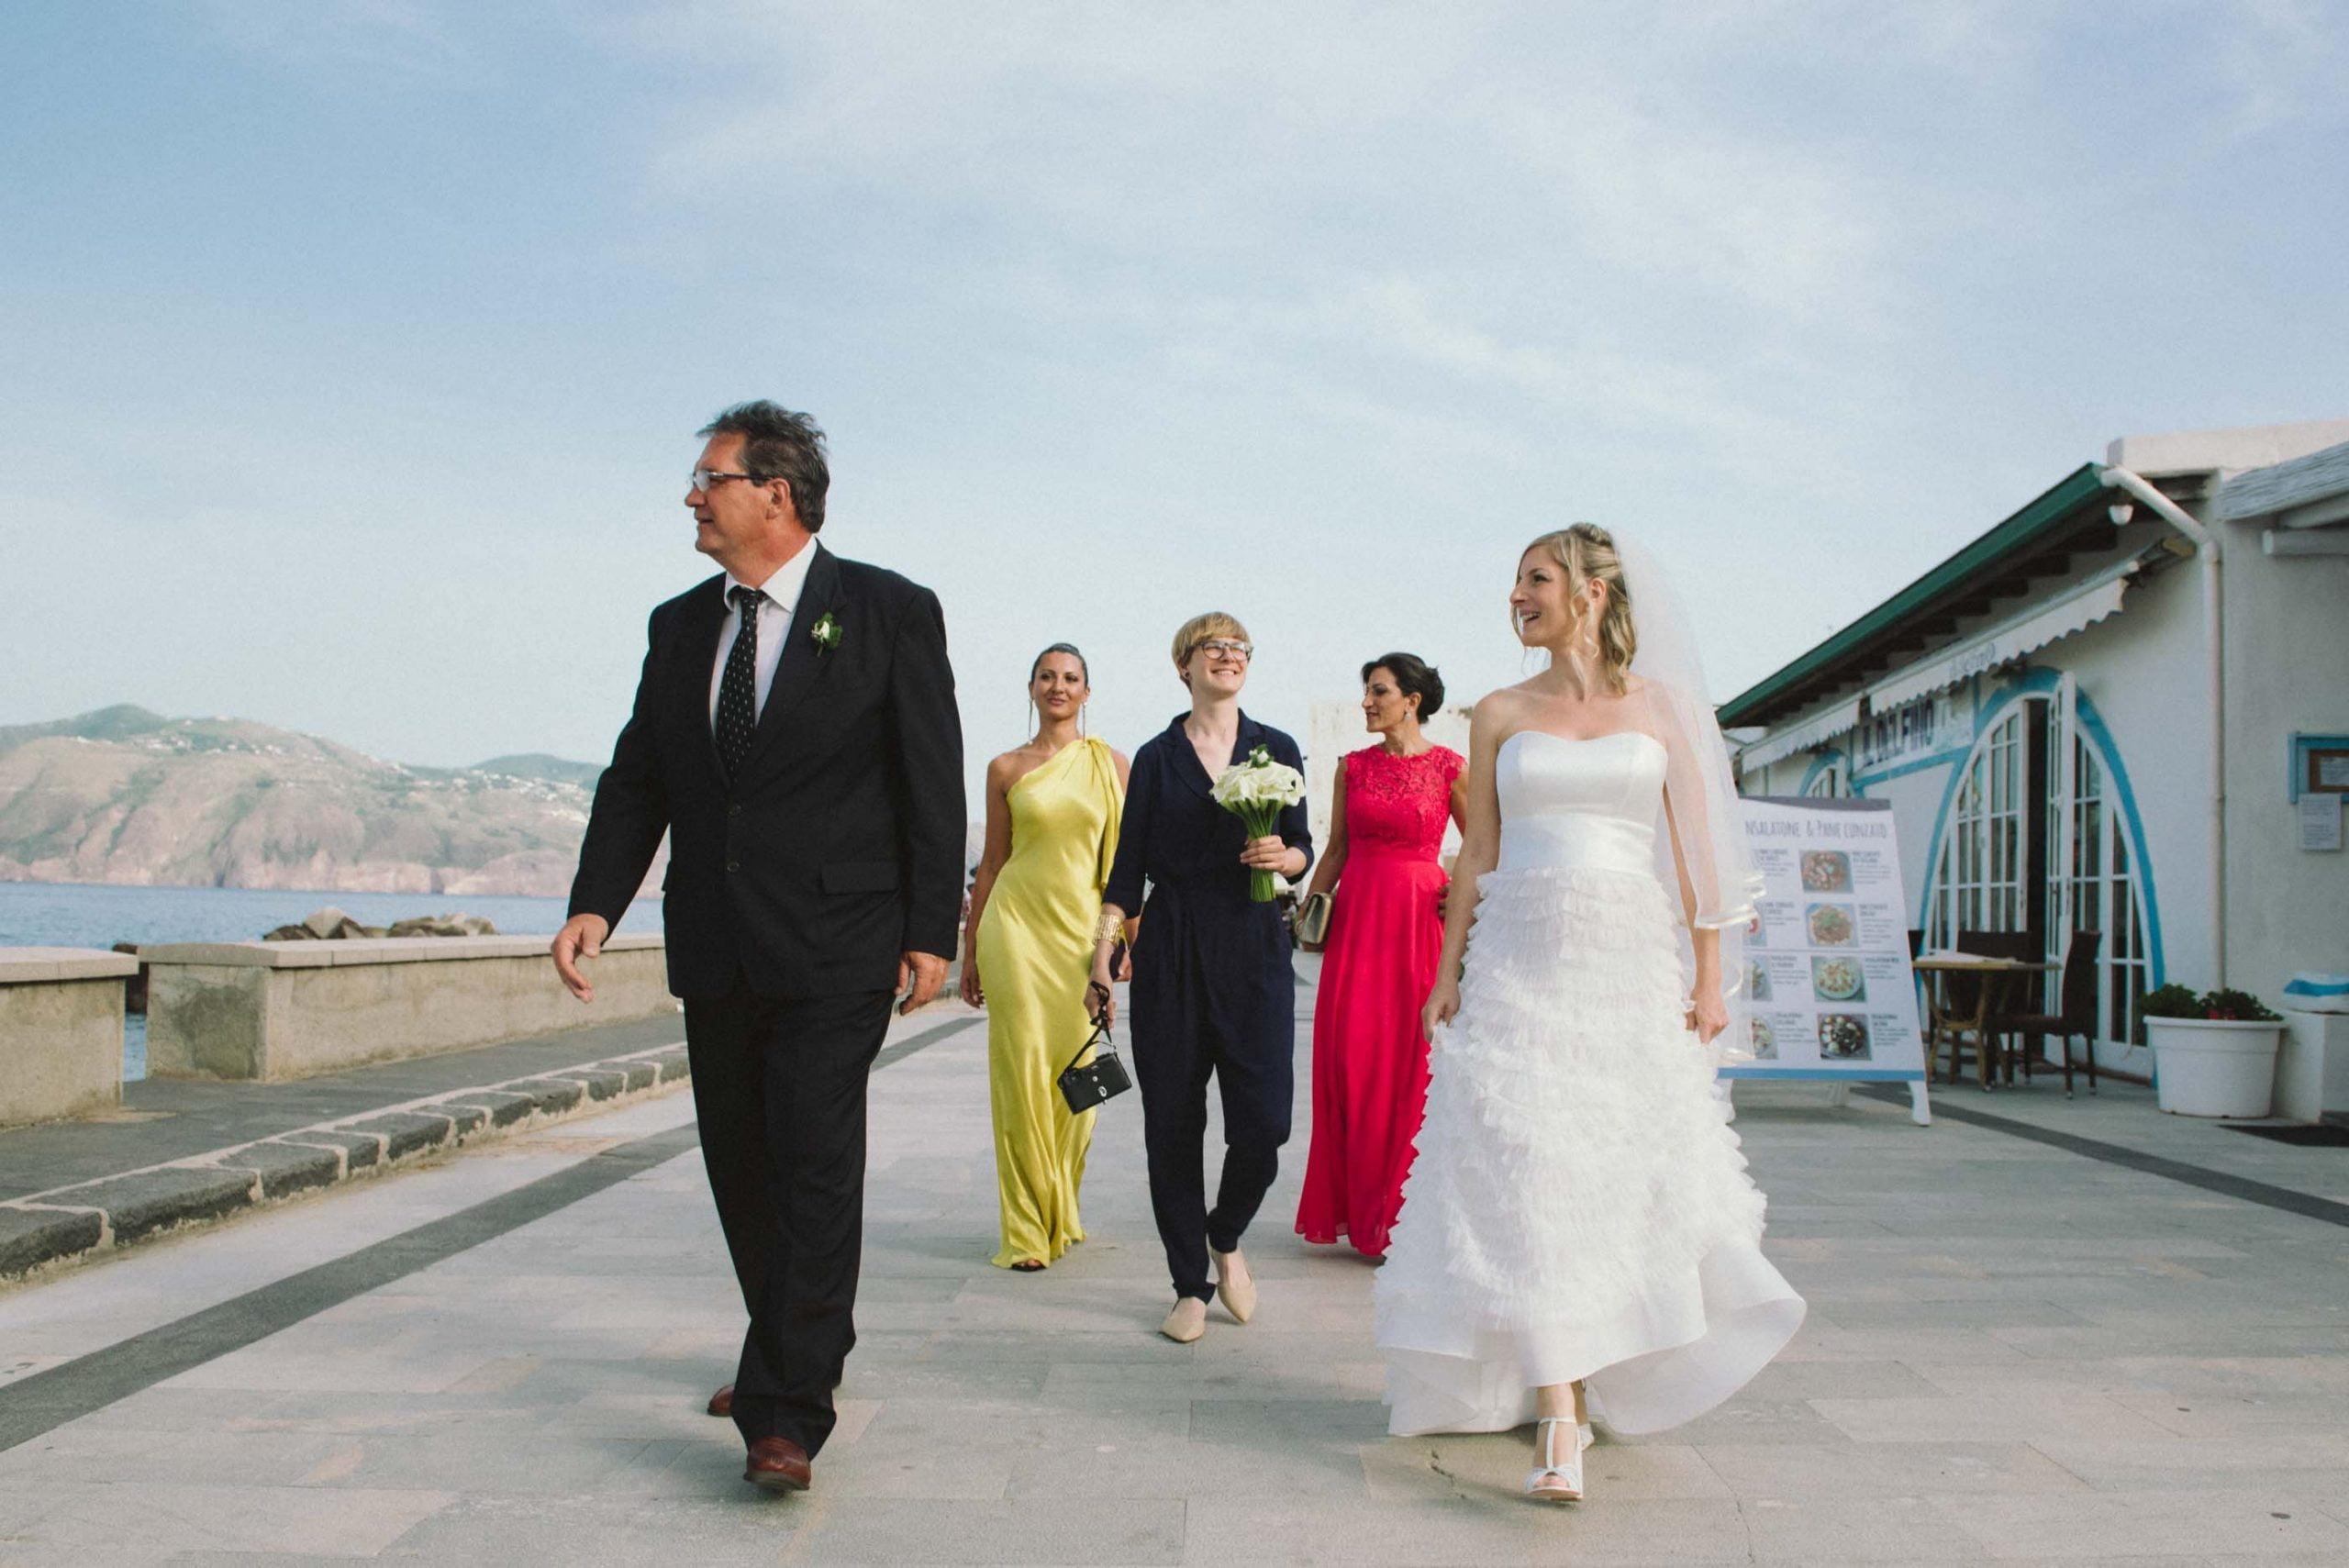 get married in the Aeolian Islands - glam